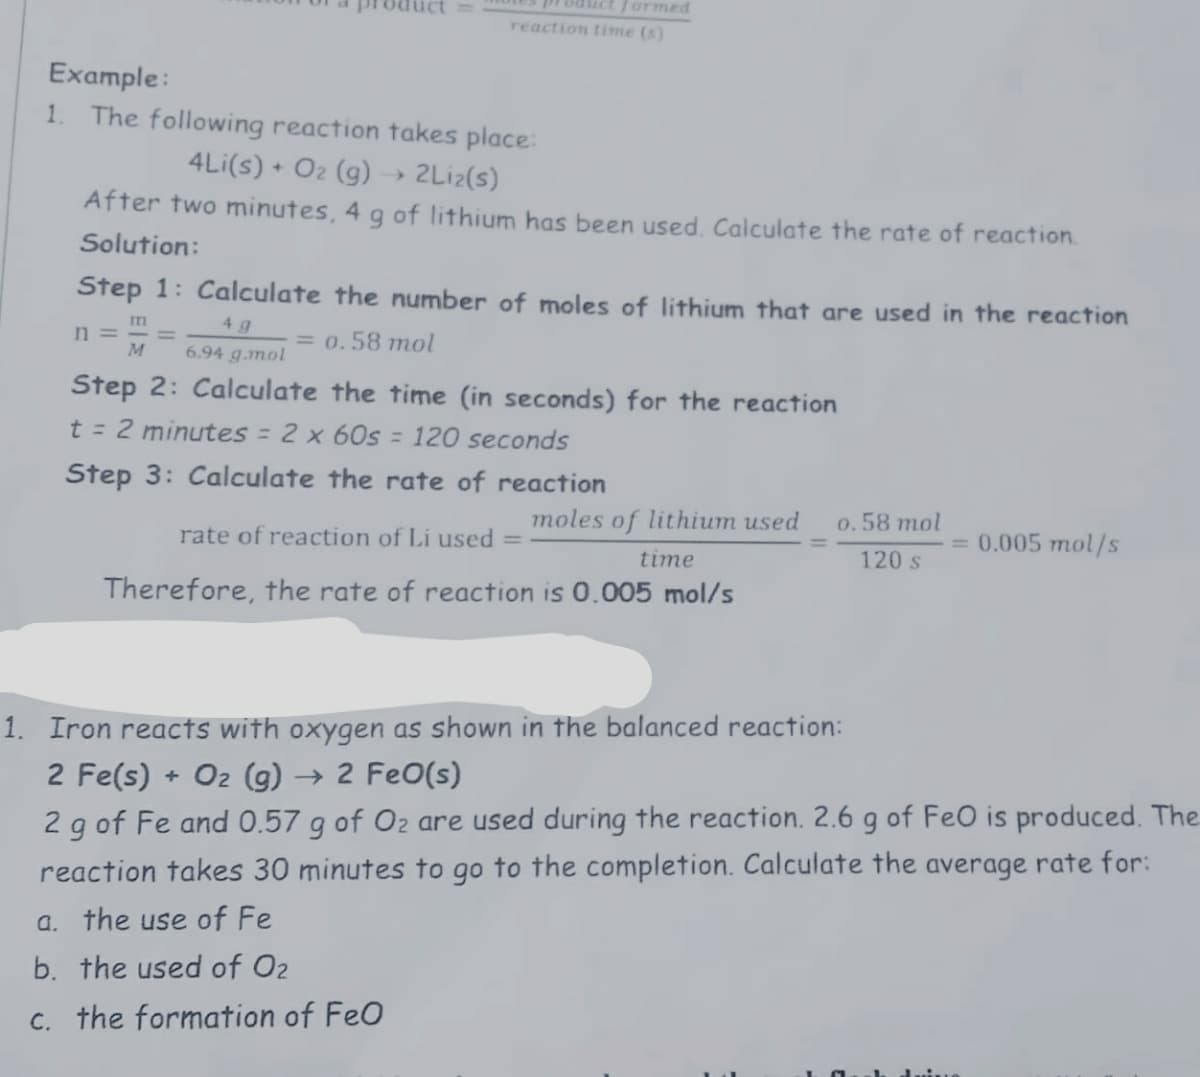 uct
ES product formed
reaction time (s)
Example:
1.
The following reaction takes place:
4Li(s) + O2 (g) → 2Lİ2(s)
After two minutes, 4 g of lithium has been used, Calculate the rate of reaction.
Solution:
Step 1: Calculate the number of moles of lithium that are used in the reaction
4 g
n =
M
= 0.58 mol
6.94 g.mol
Step 2: Calculate the time (in seconds) for the reaction
t = 2 minutes = 2 x 6Os = 120 seconds
Step 3: Calculate the rate of reaction
moles of lithium used
0.58 mol
rate of reaction of Li used =
= 0.005 mol/s
time
120 s
Therefore, the rate of reaction is 0.005 mol/s
1. Iron reacts with oxygen as shown in the balanced reaction:
2 Fe(s) + O2 (g) → 2 FeO(s)
2 g of Fe and 0.57 g of O2 are used during the reaction. 2.6 g of FeO is produced. The
reaction takes 30 minutes to go to the completion. Calculate the average rate for:
a. the use of Fe
b. the used of O2
c. the formation of FeO
